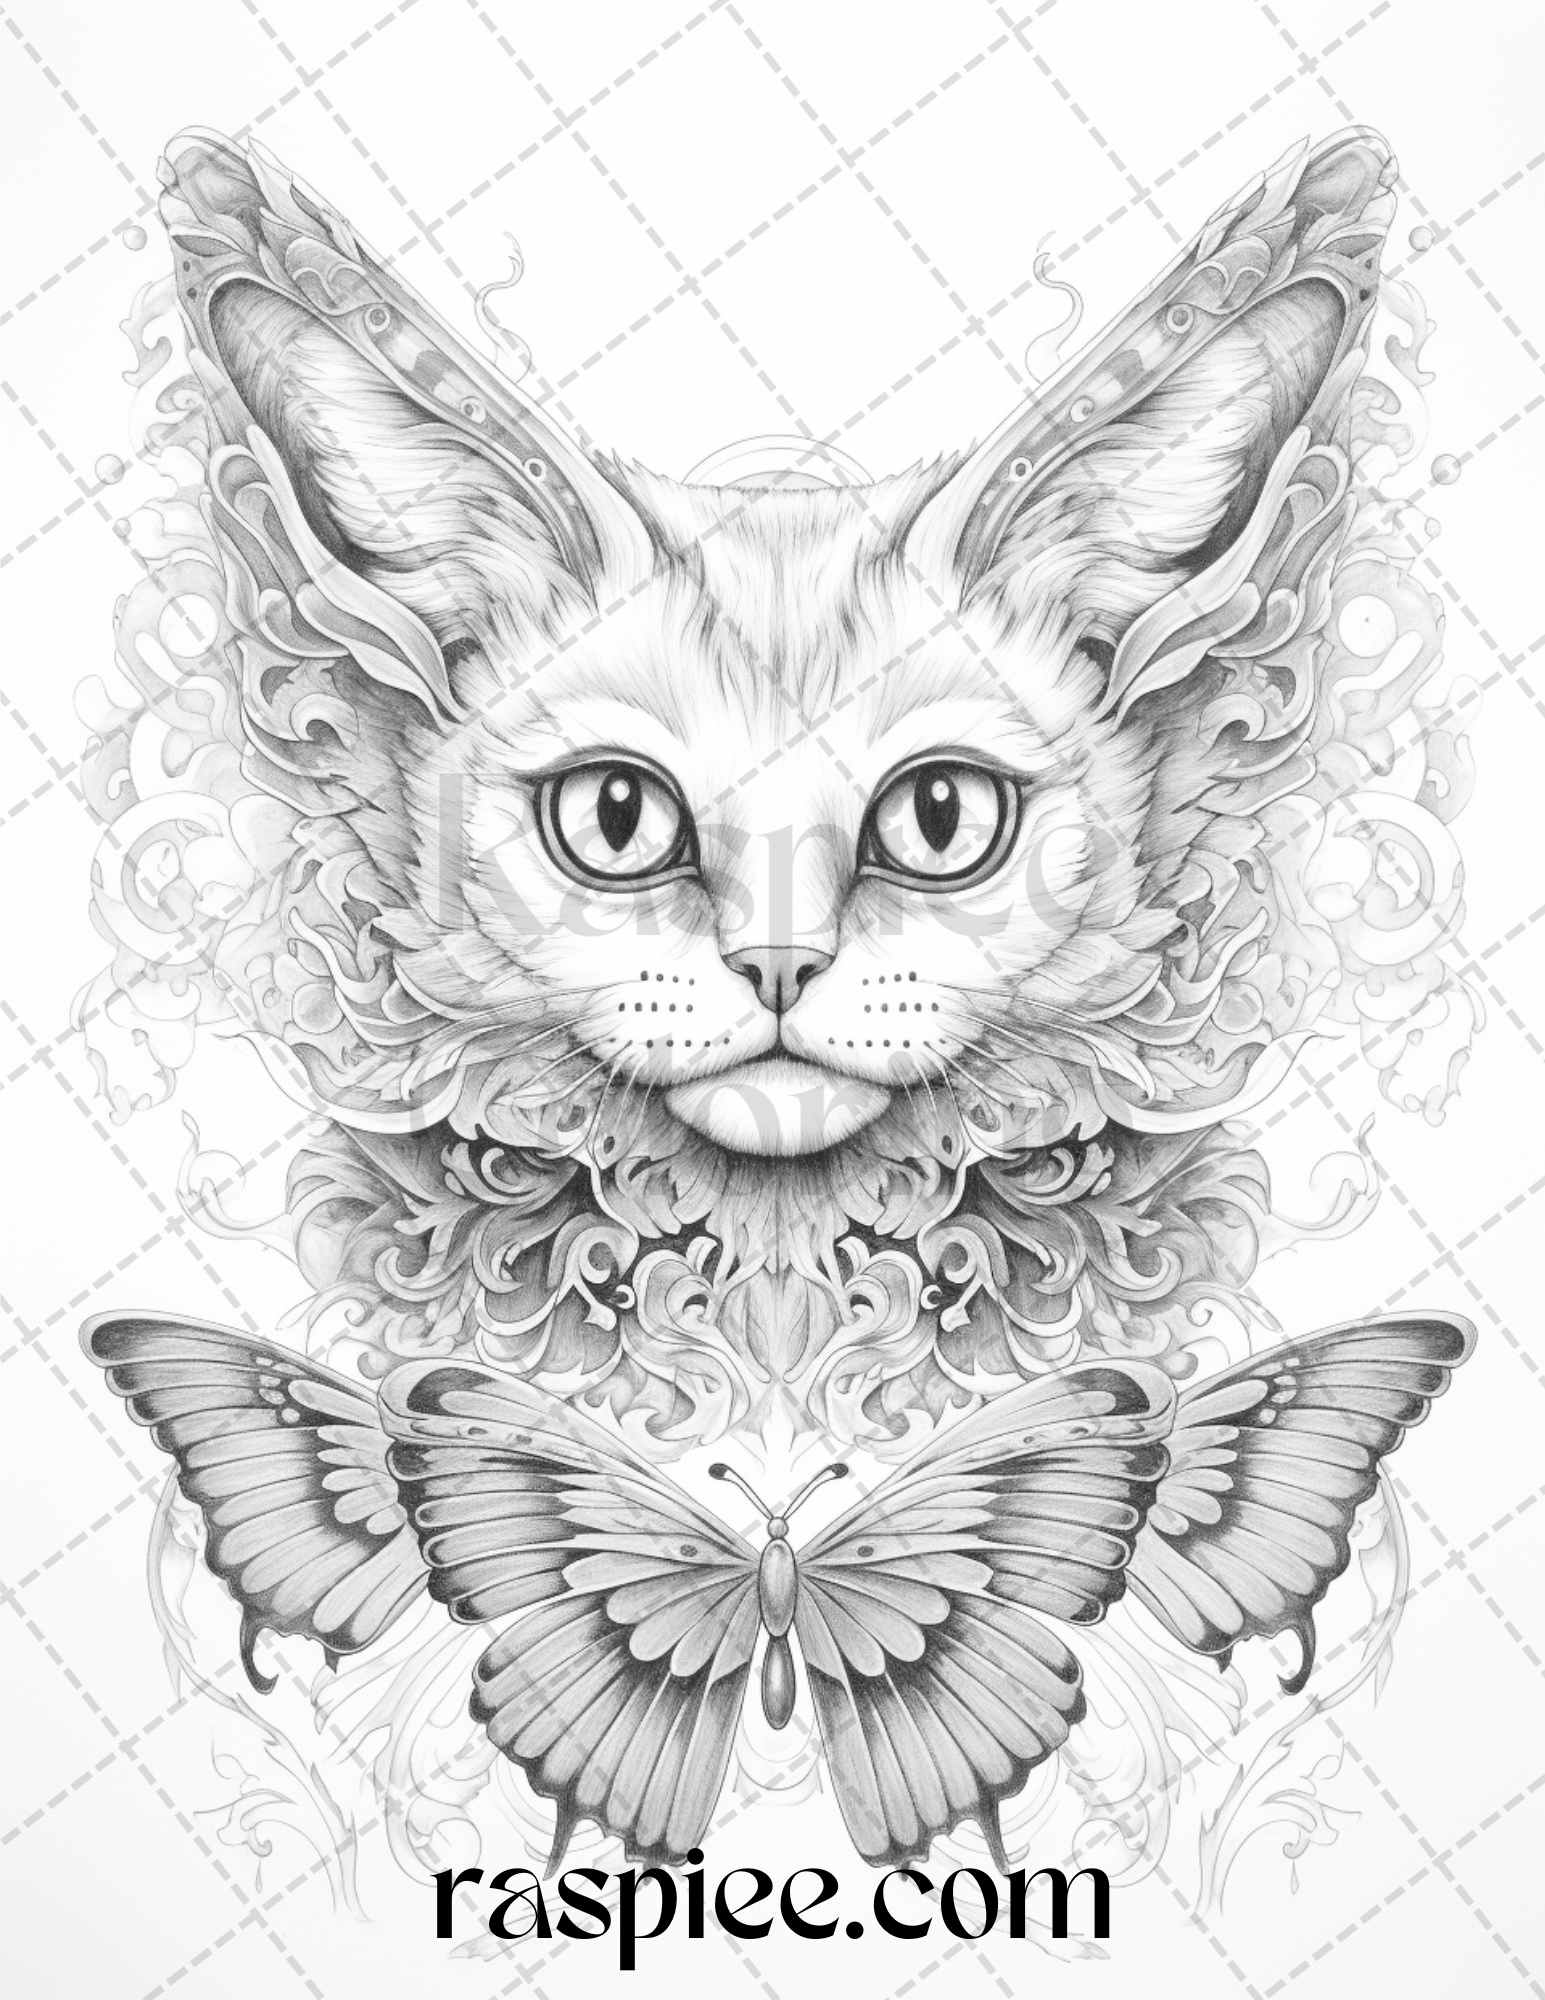 enchanting surrealism grayscale coloring page for adults, meditative grayscale coloring design for stress relief